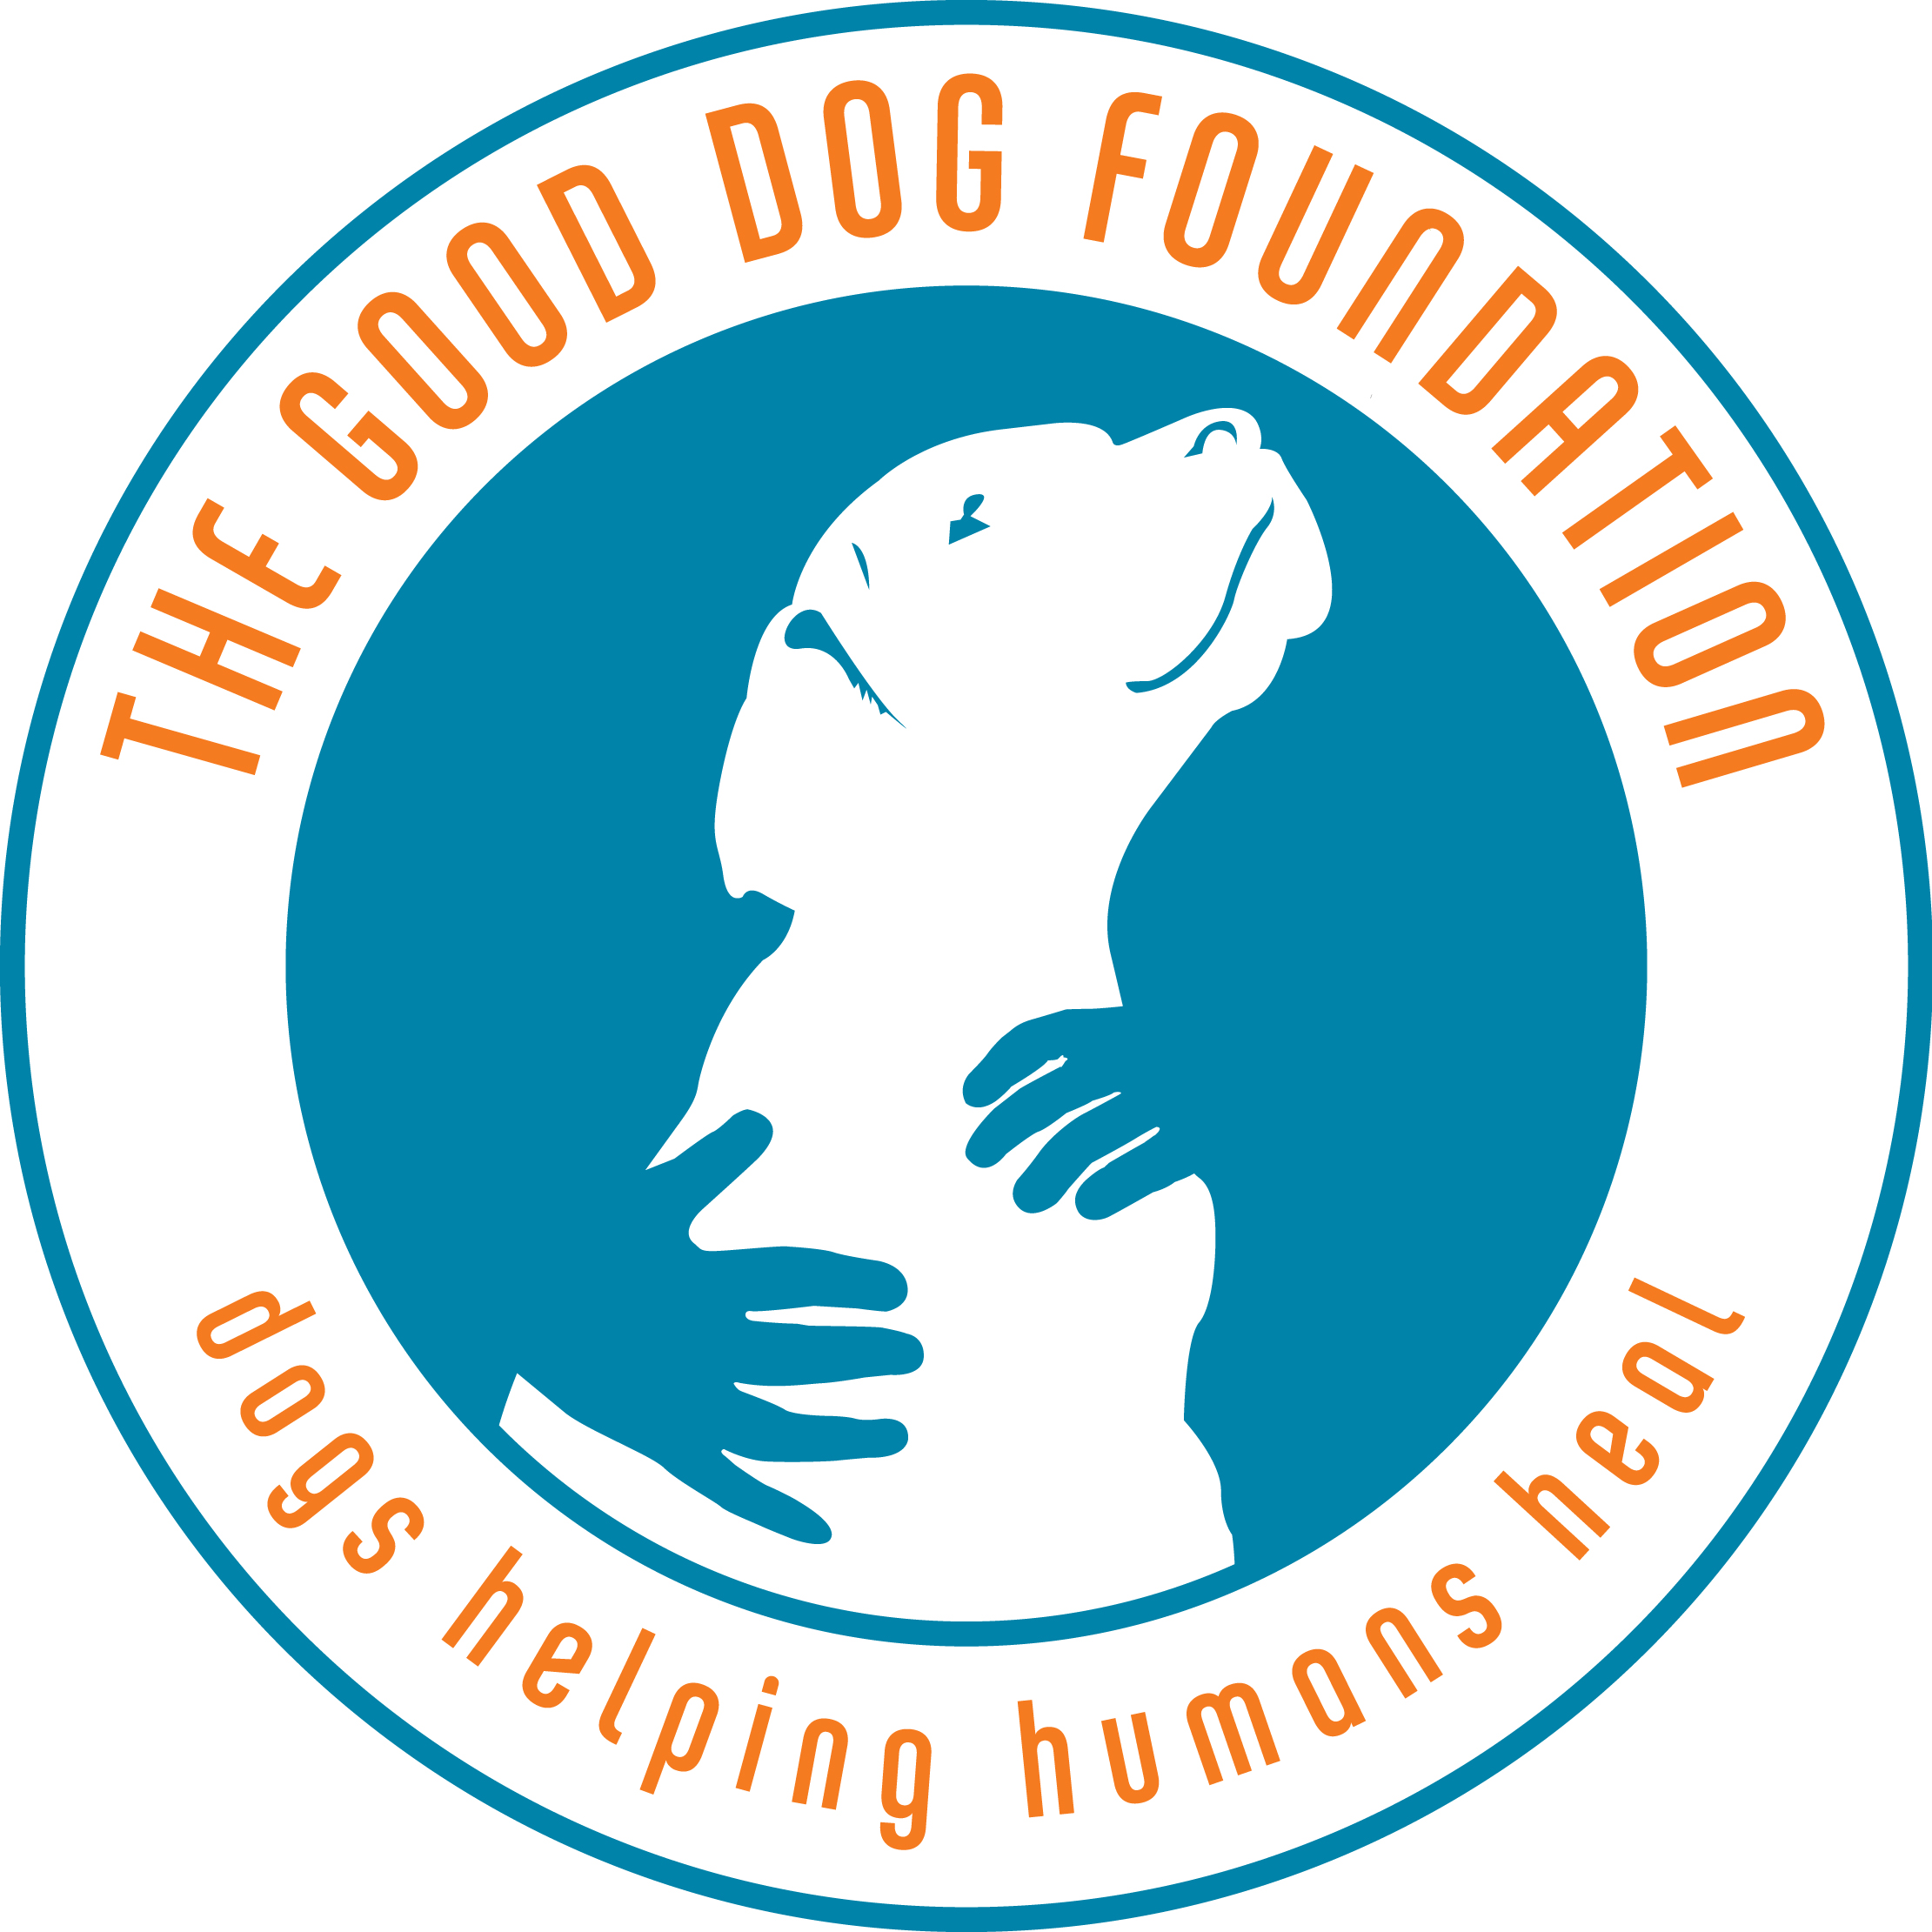 PokerDivas Partners with The Good Dog Foundation in a Howl-O-Ween Online Extravaganza 